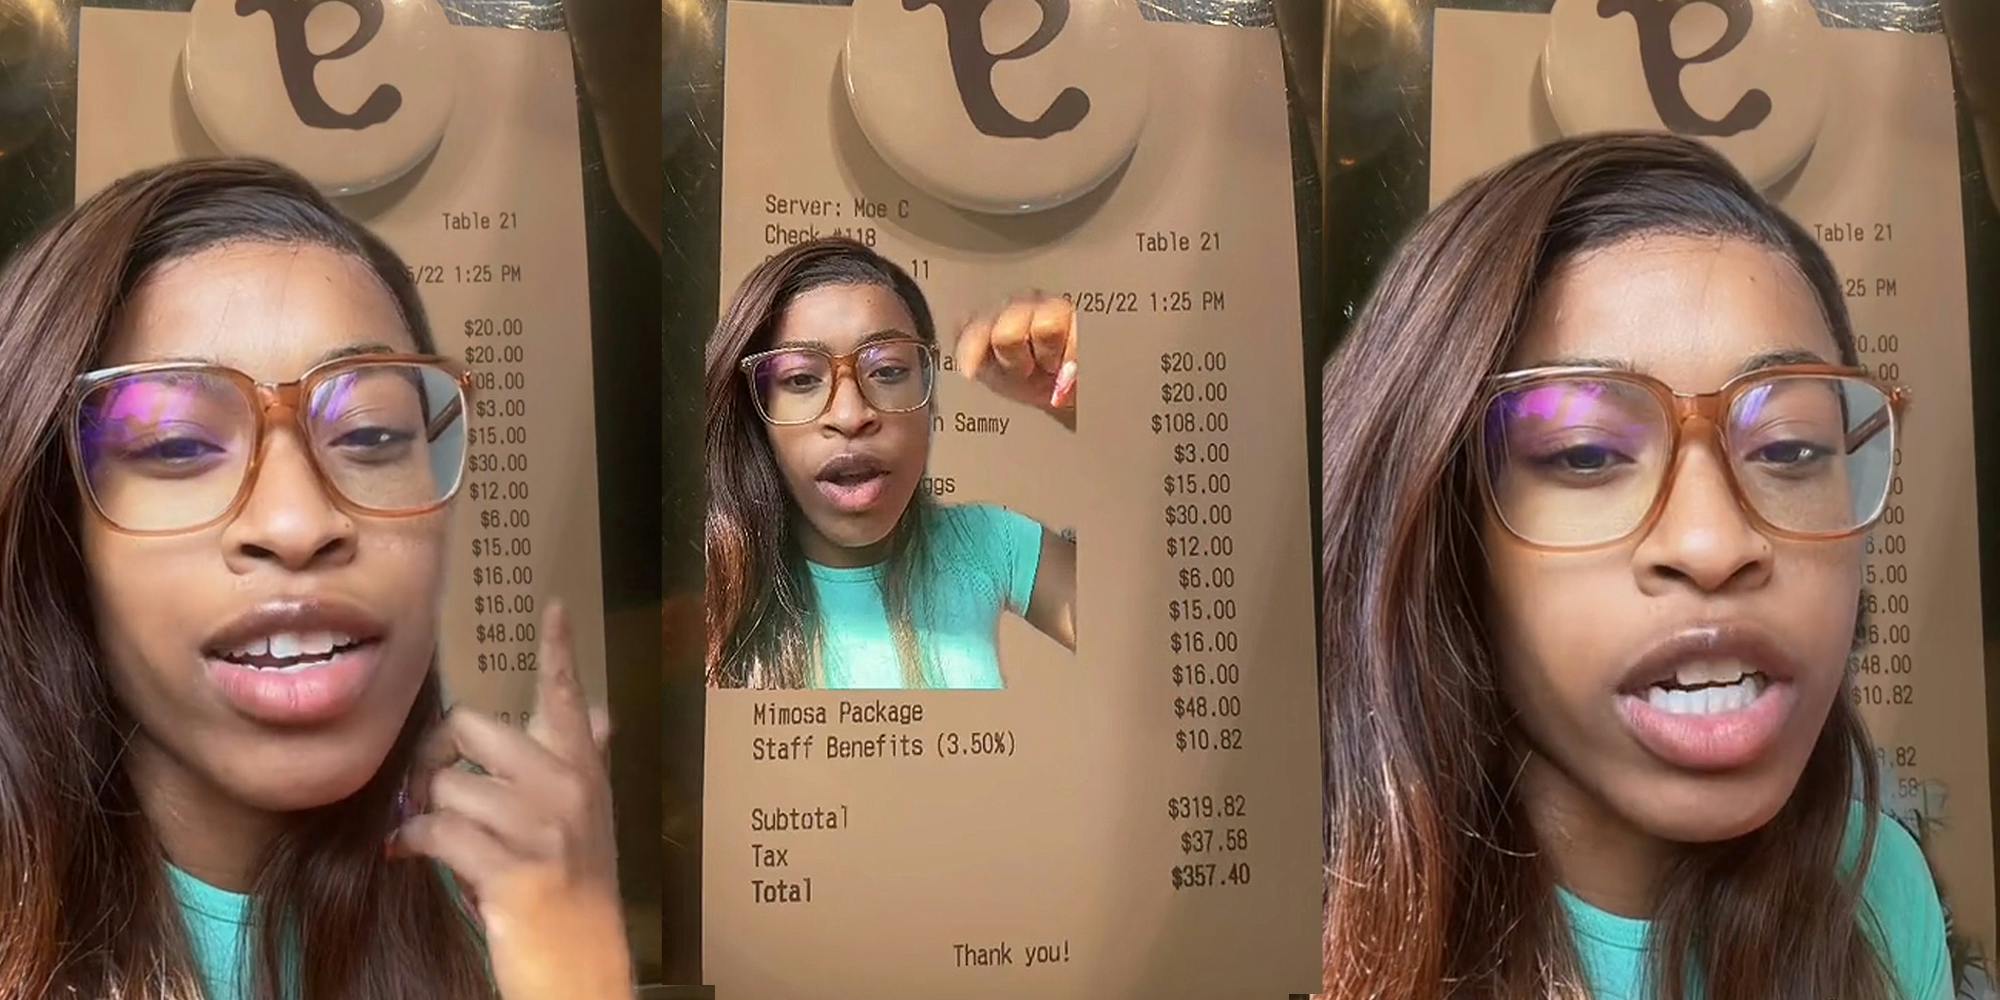 woman greenscreen TikTok pointing up over image of receipt (l) woman greenscreen TikTok pointing over image of receipt "Staff Benefits (3.50%) $10.82" (c) woman greenscreen TikTok speaking over image of receipt (r)